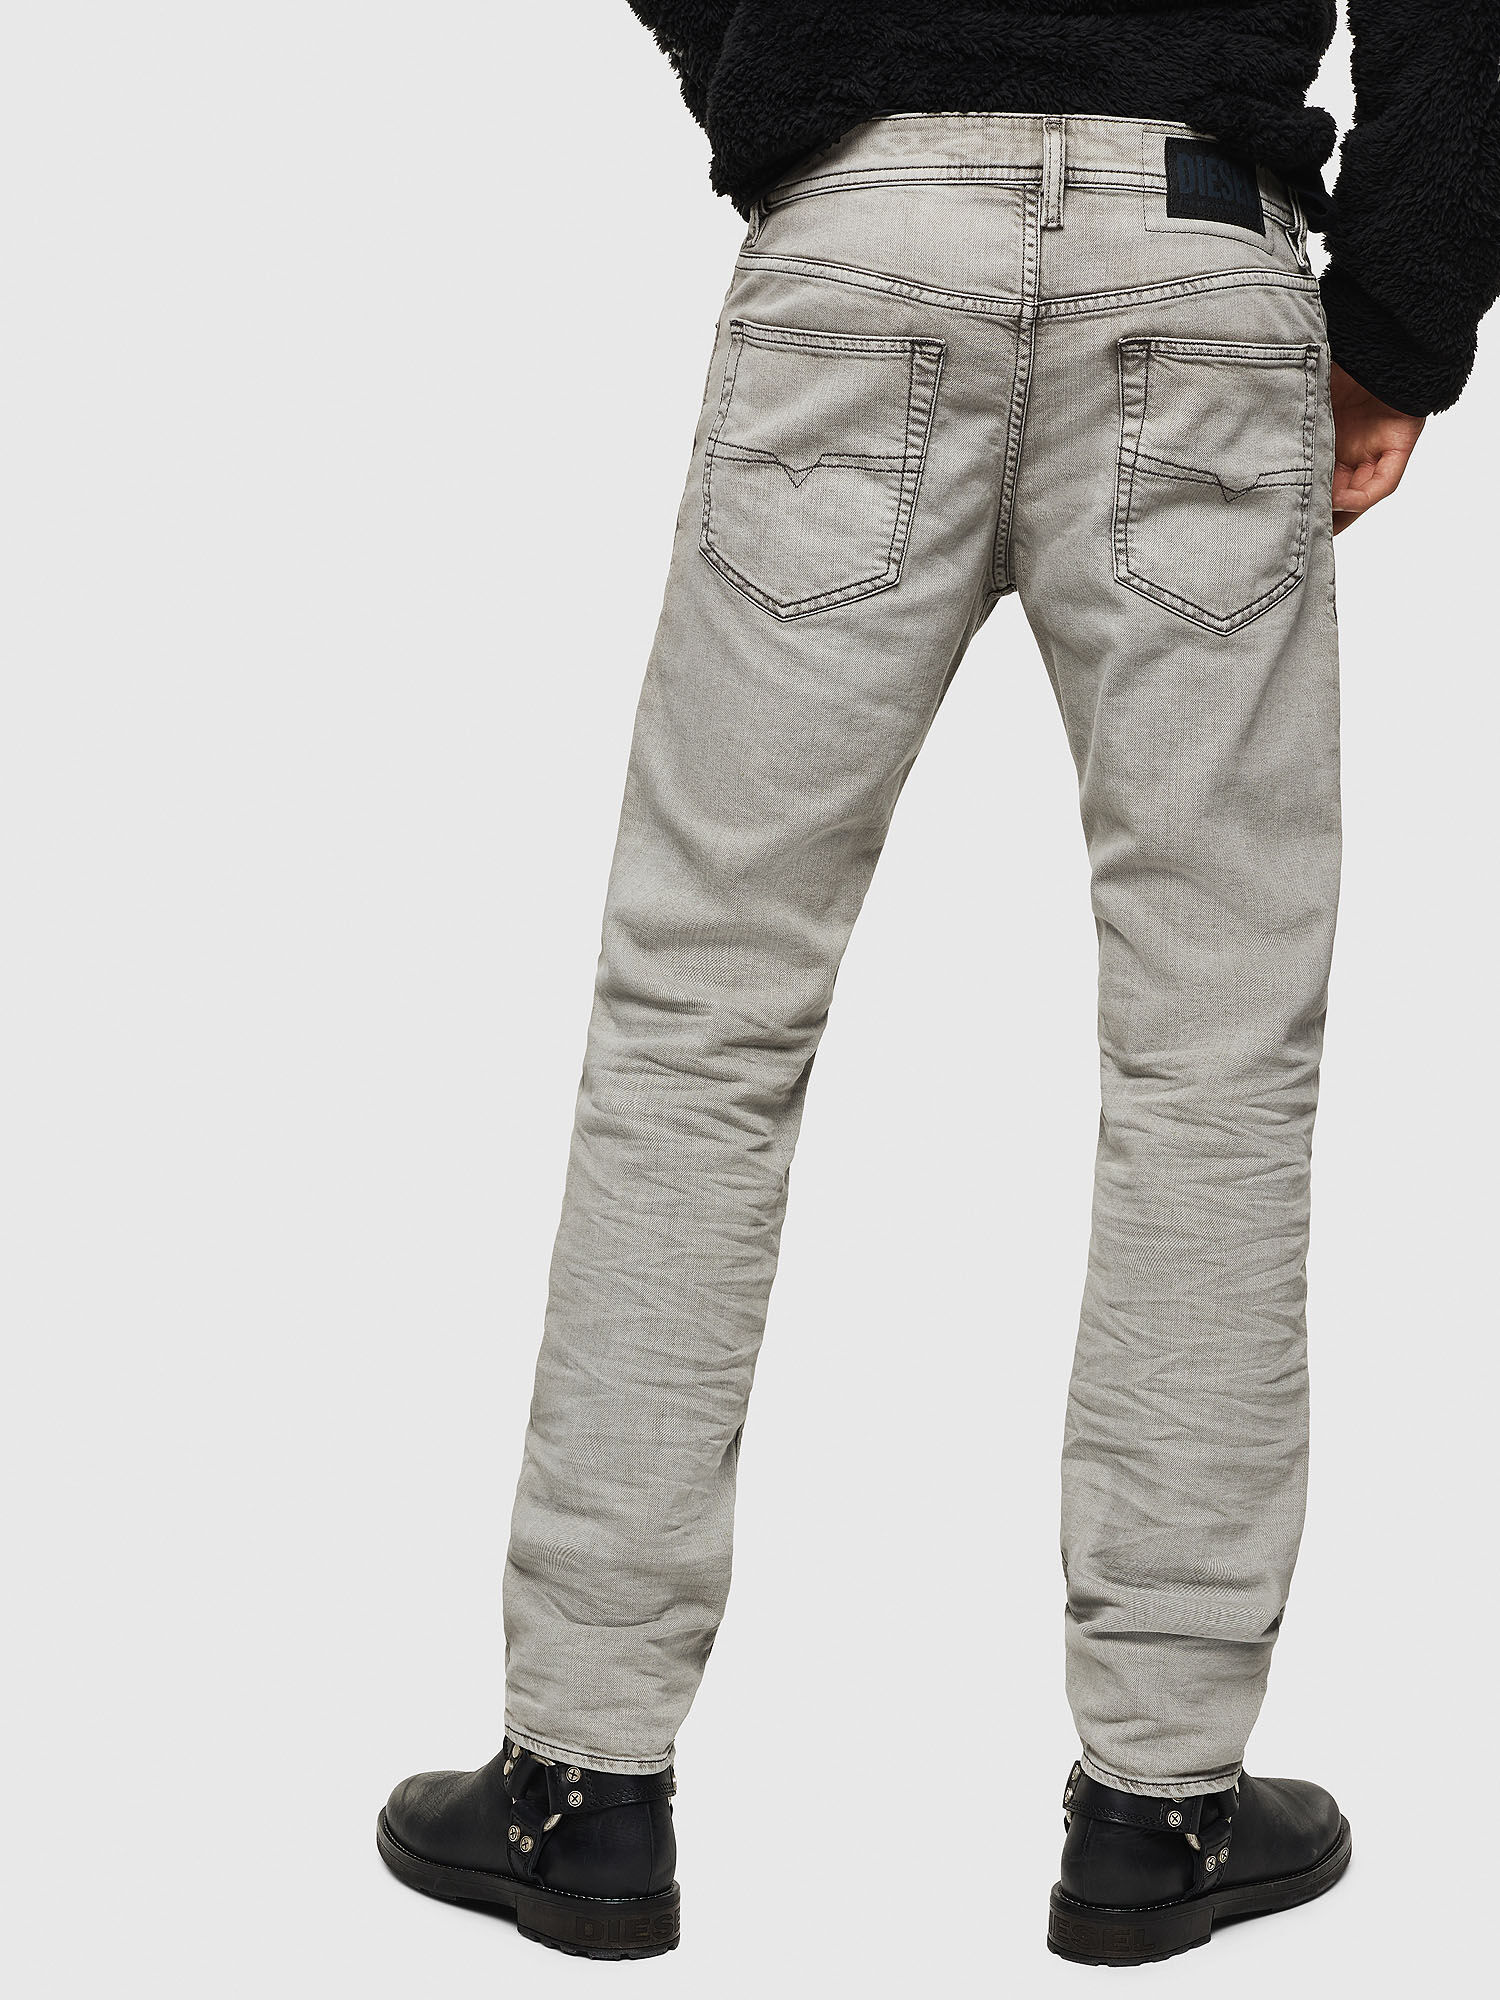 high rise button jeans